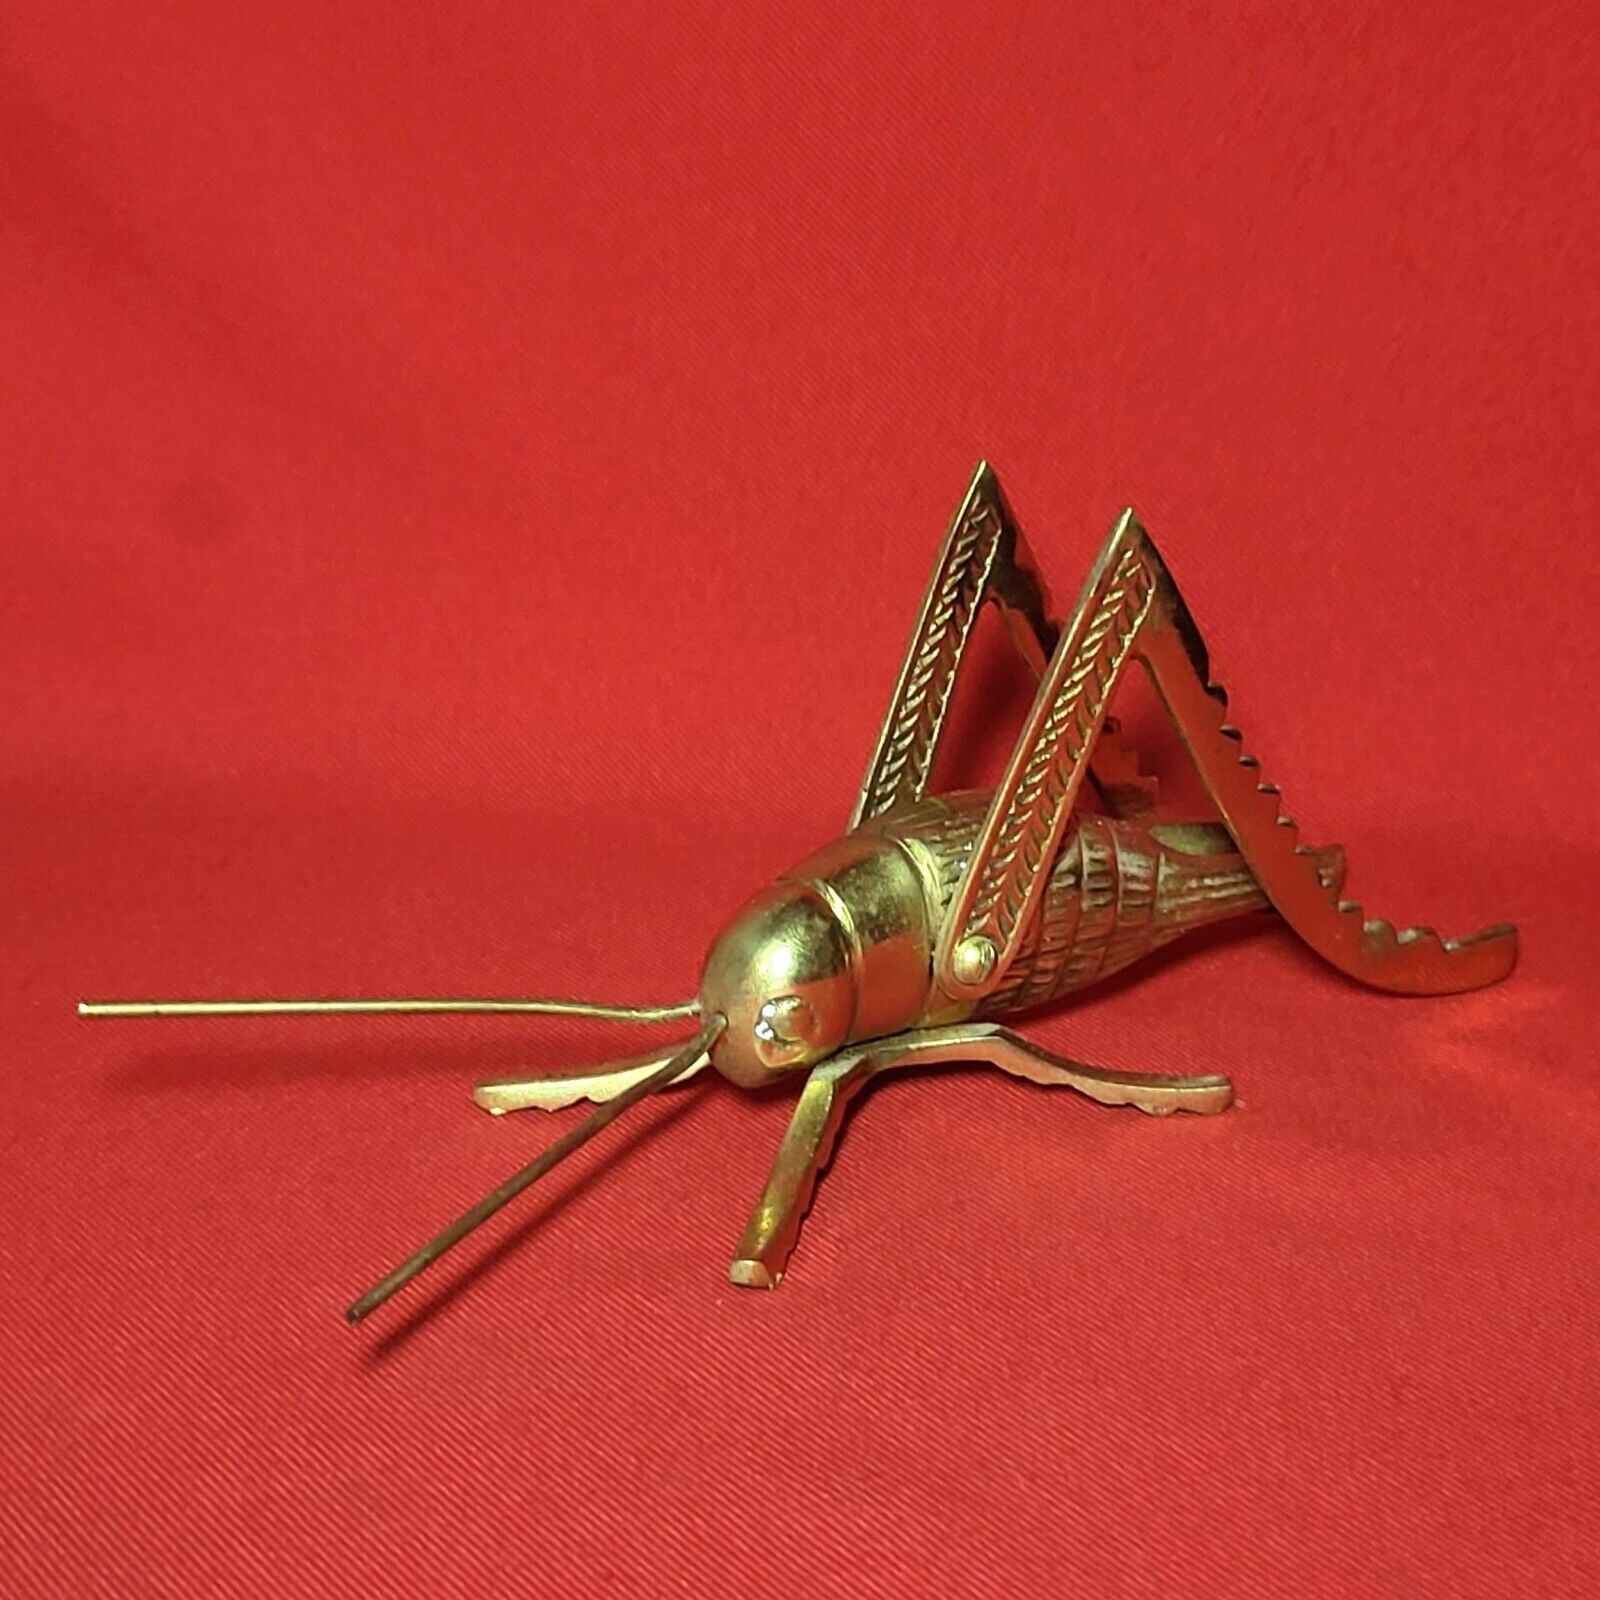 Vintage Solid Brass Cricket Grasshopper Insect Sculpture Paperweight Home Decor